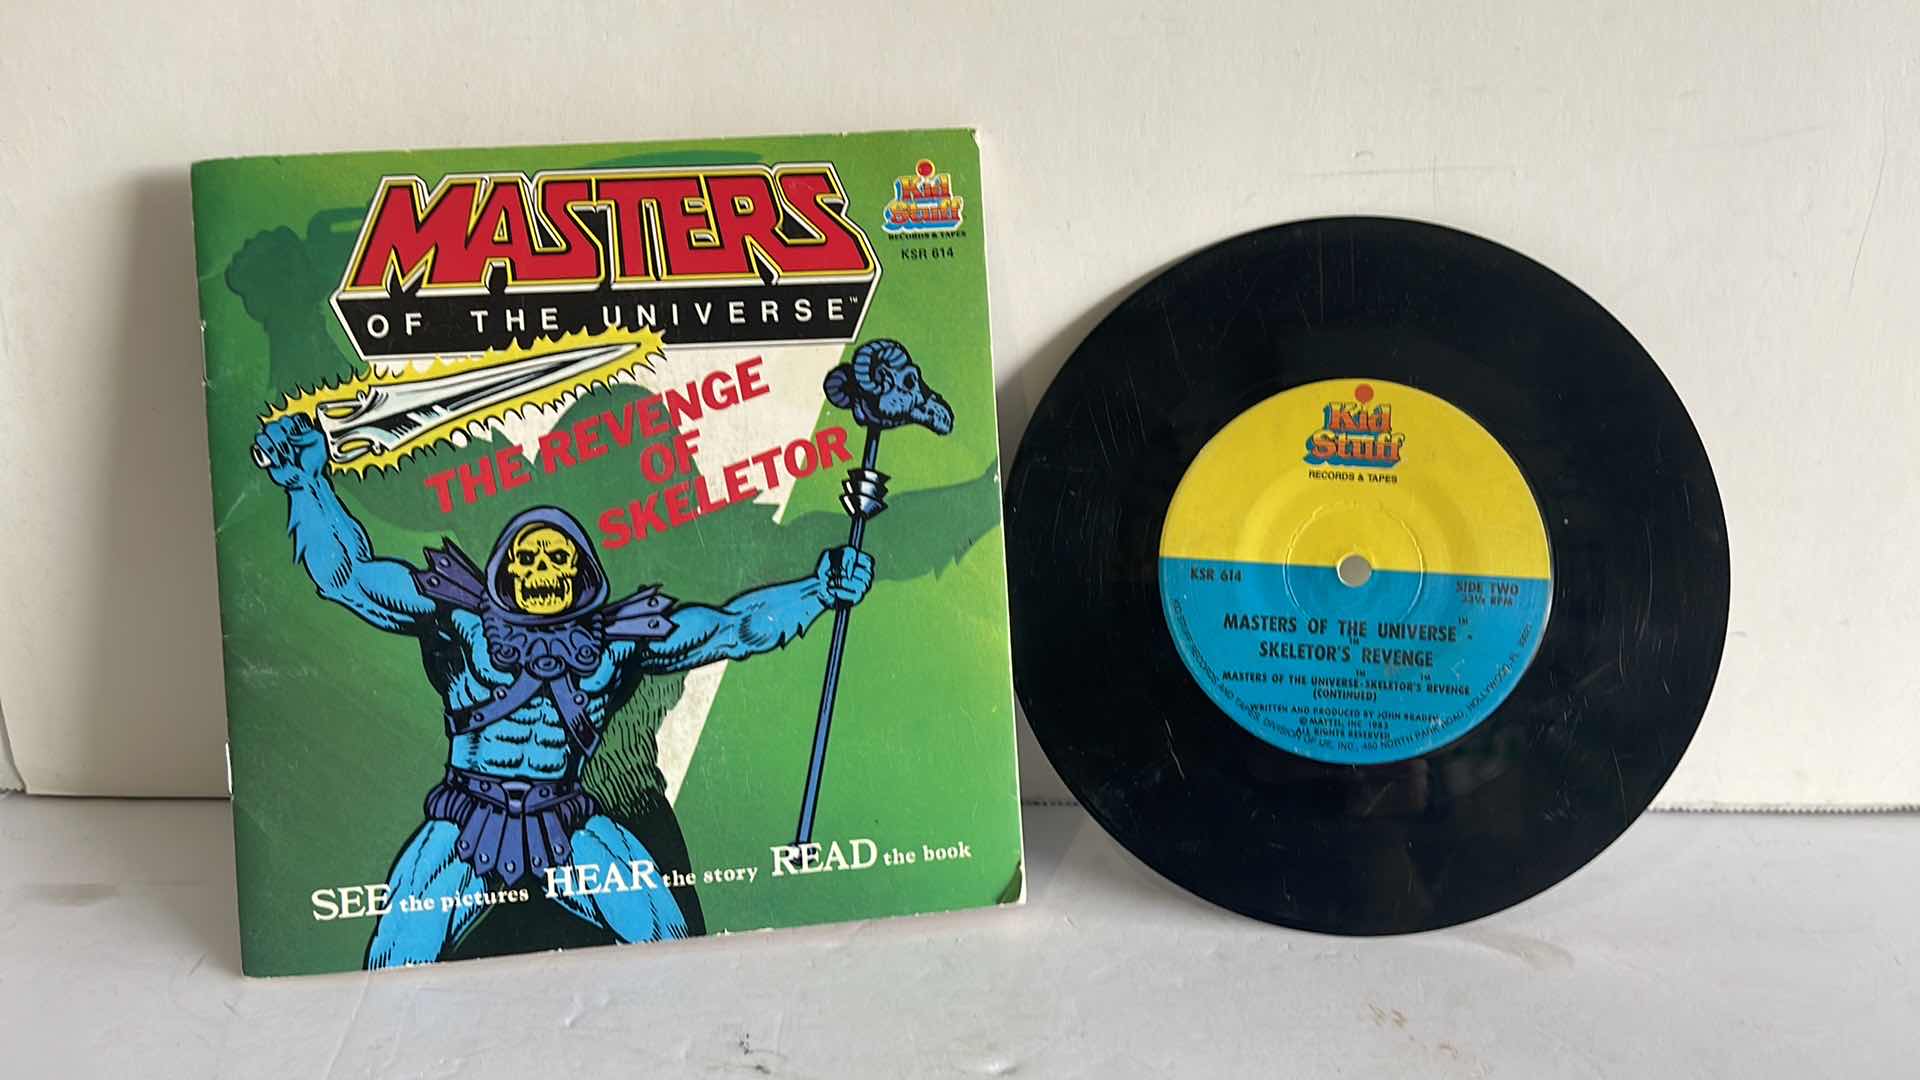 Photo 1 of NIB 1983 MASTERS OF THE UNIVERSE THE REVENGE OF SKELETOR RECORD & BOOK MSRP $18